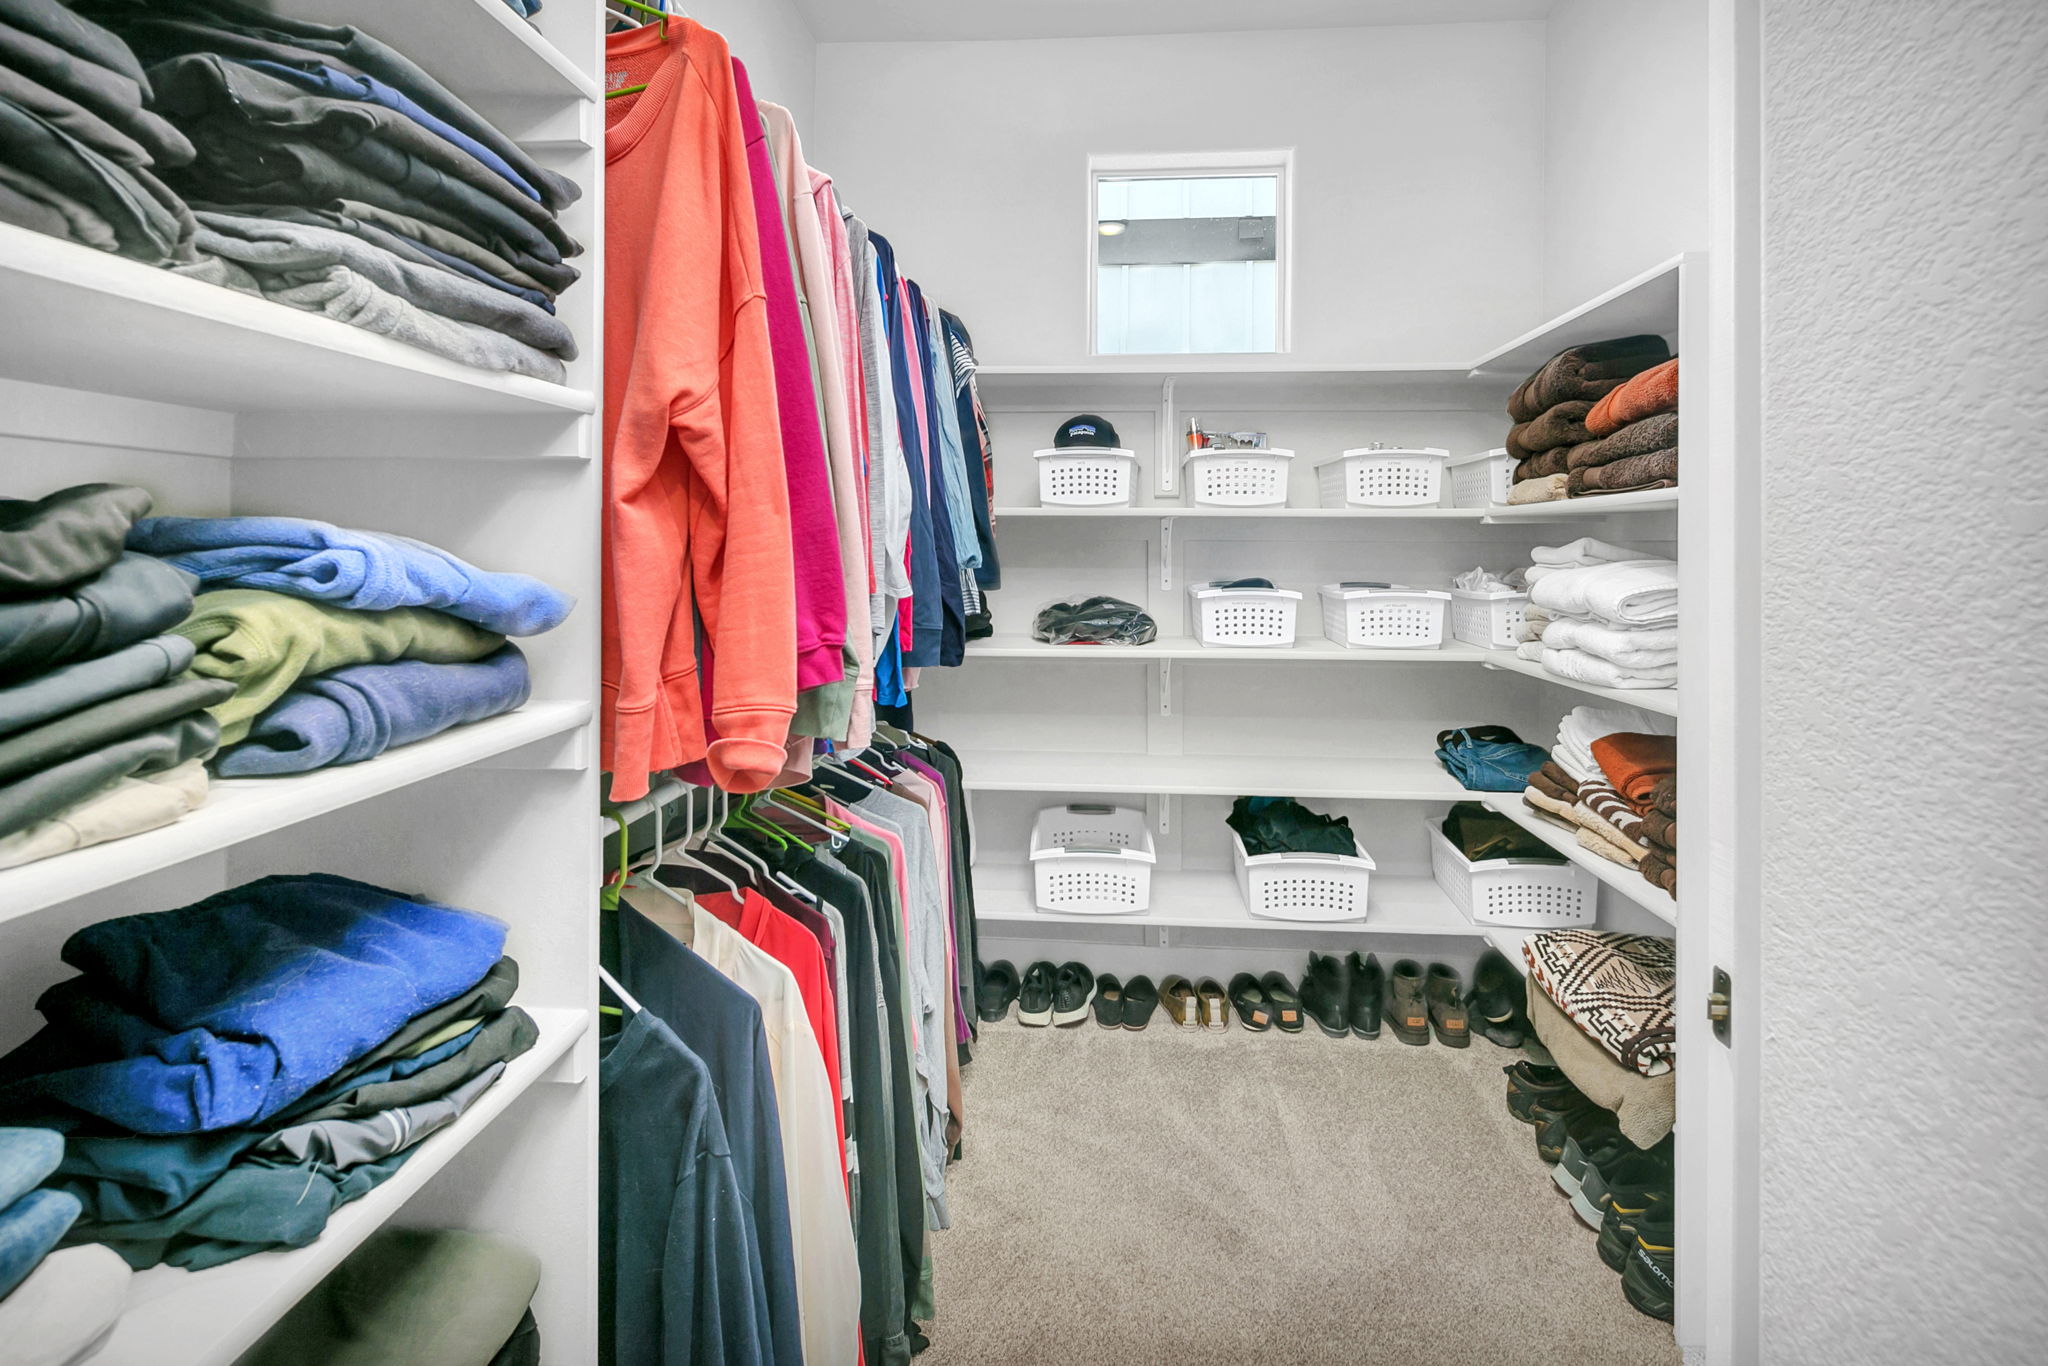 You Will Love the Huge Walk-In Closet